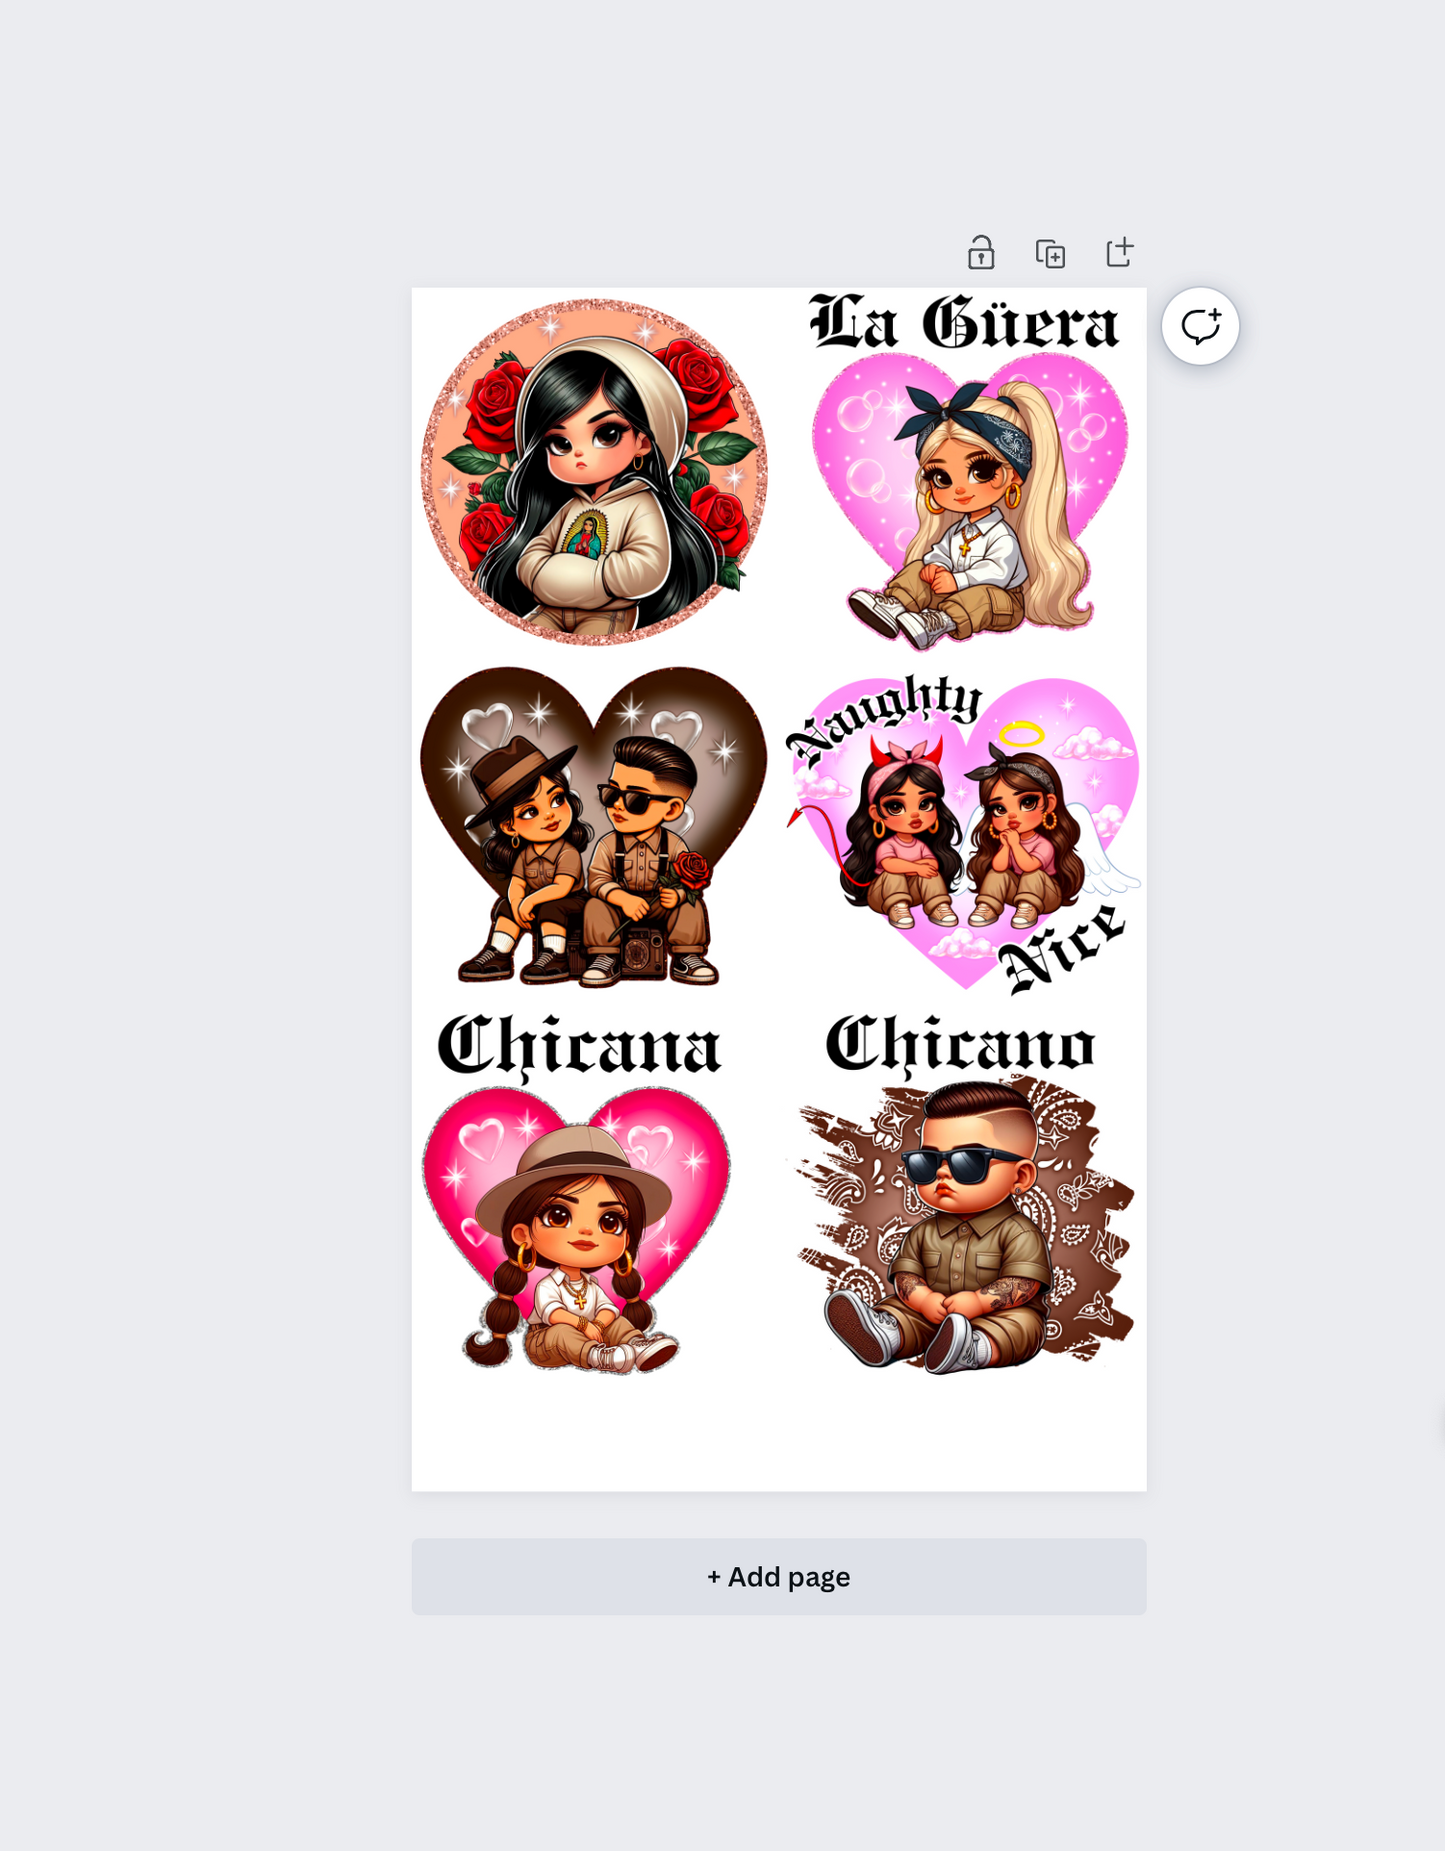 Cholo Love Premade Gangsheets-36 inches- DTF Transfer ready to press -24 hour turnaround timeframe